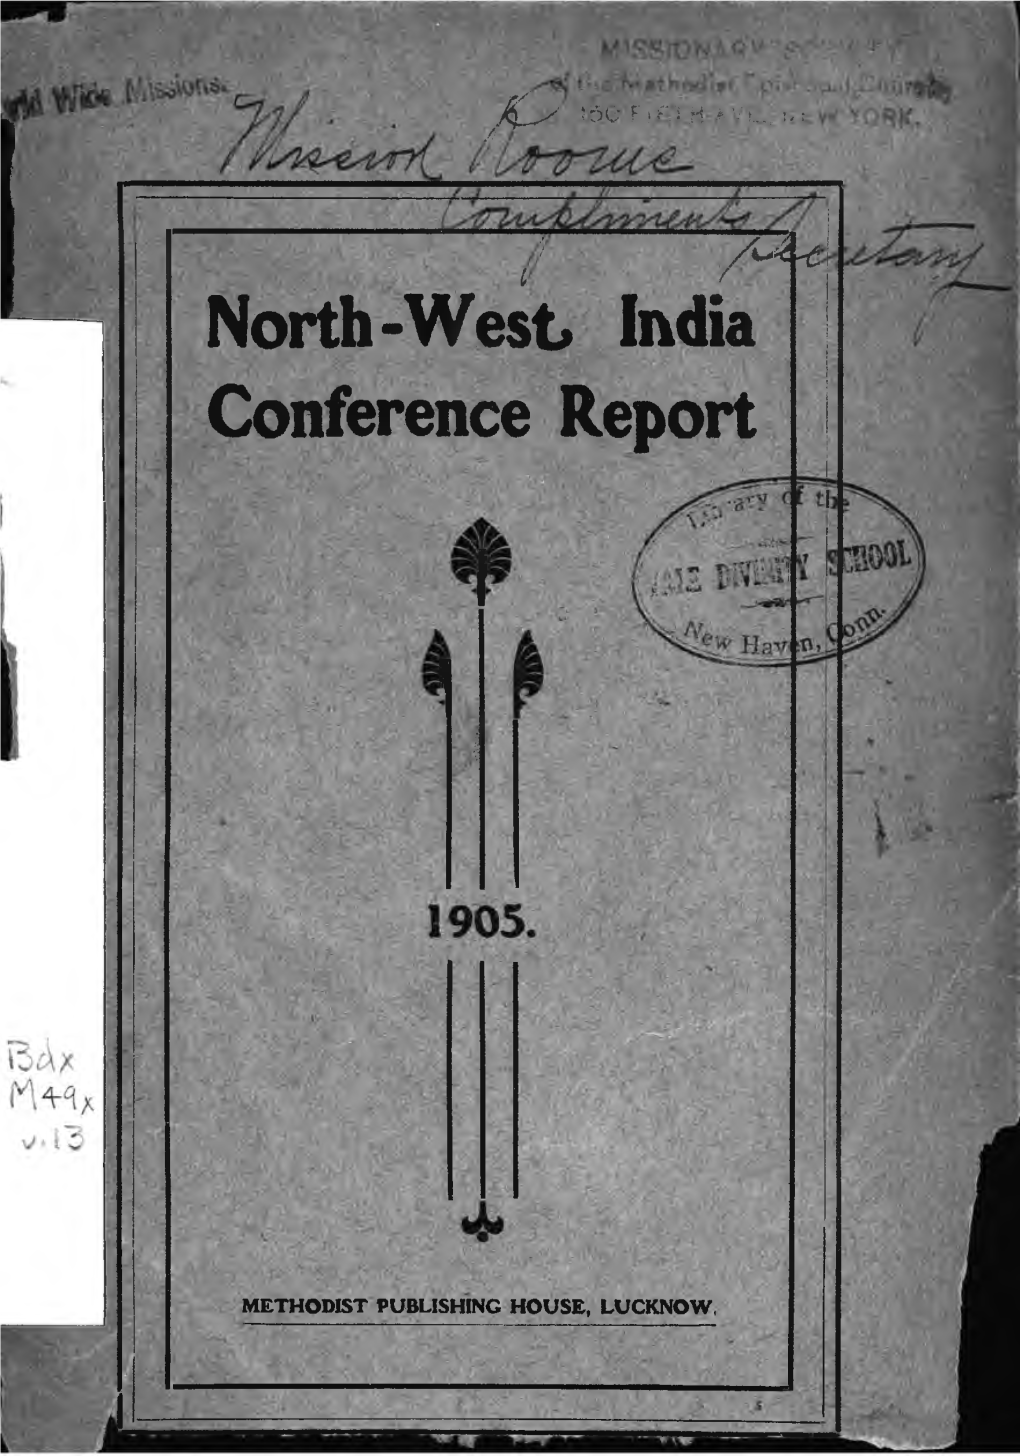 North-Wesl India Conference Report